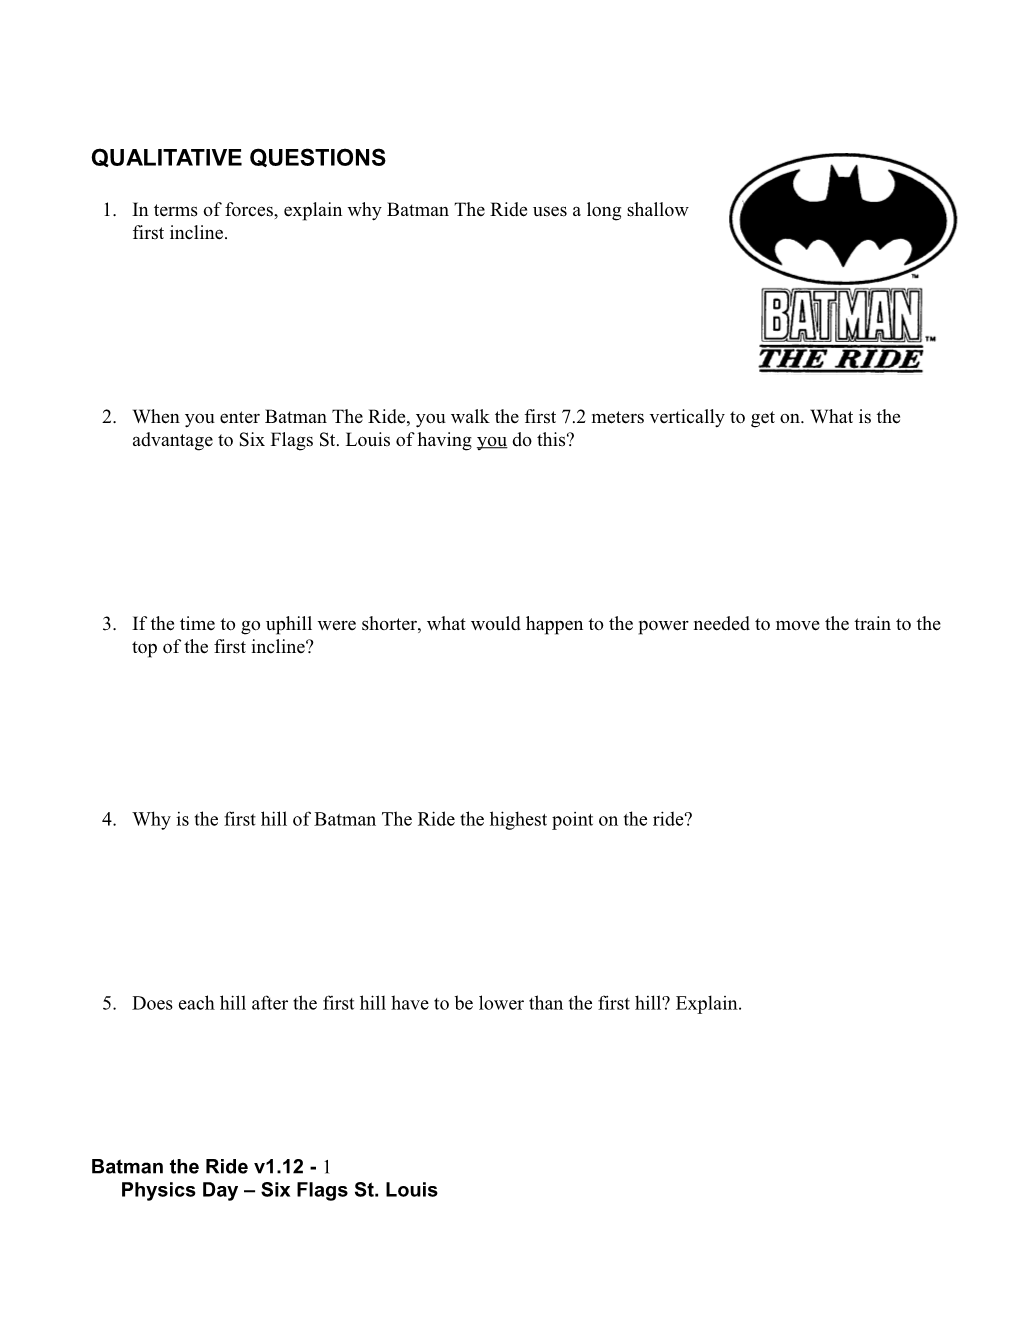 1.In Terms of Forces, Explain Why Batman the Ride Uses a Long Shallow First Incline